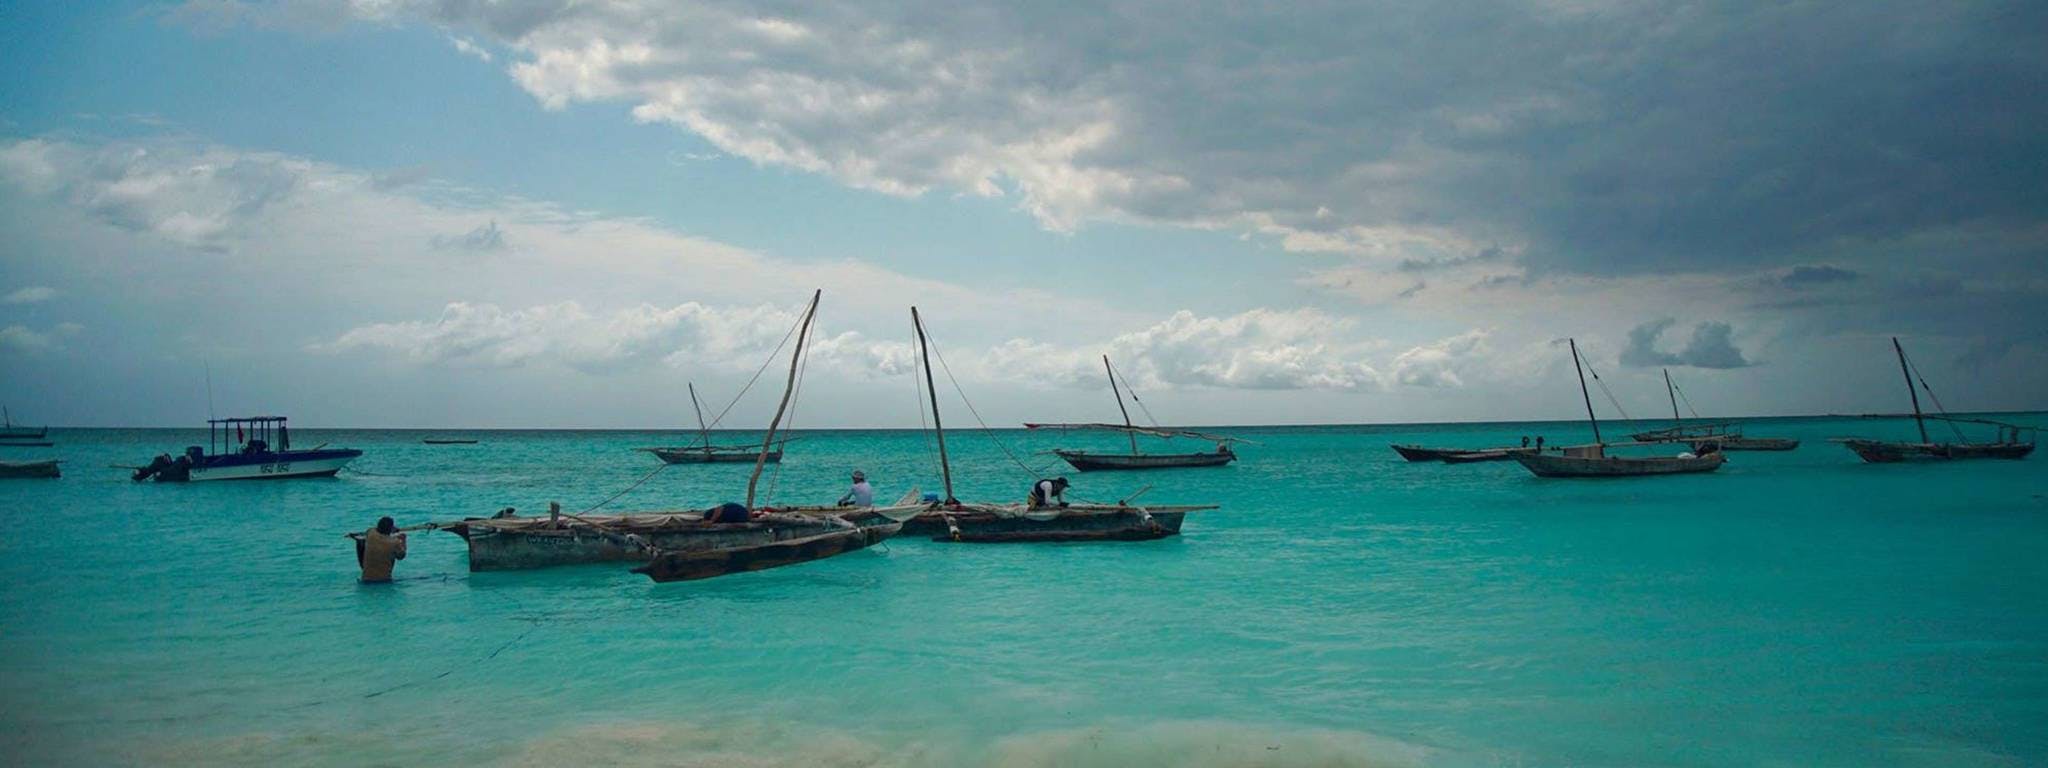 A header photo showing several small boats floating near the shoreline